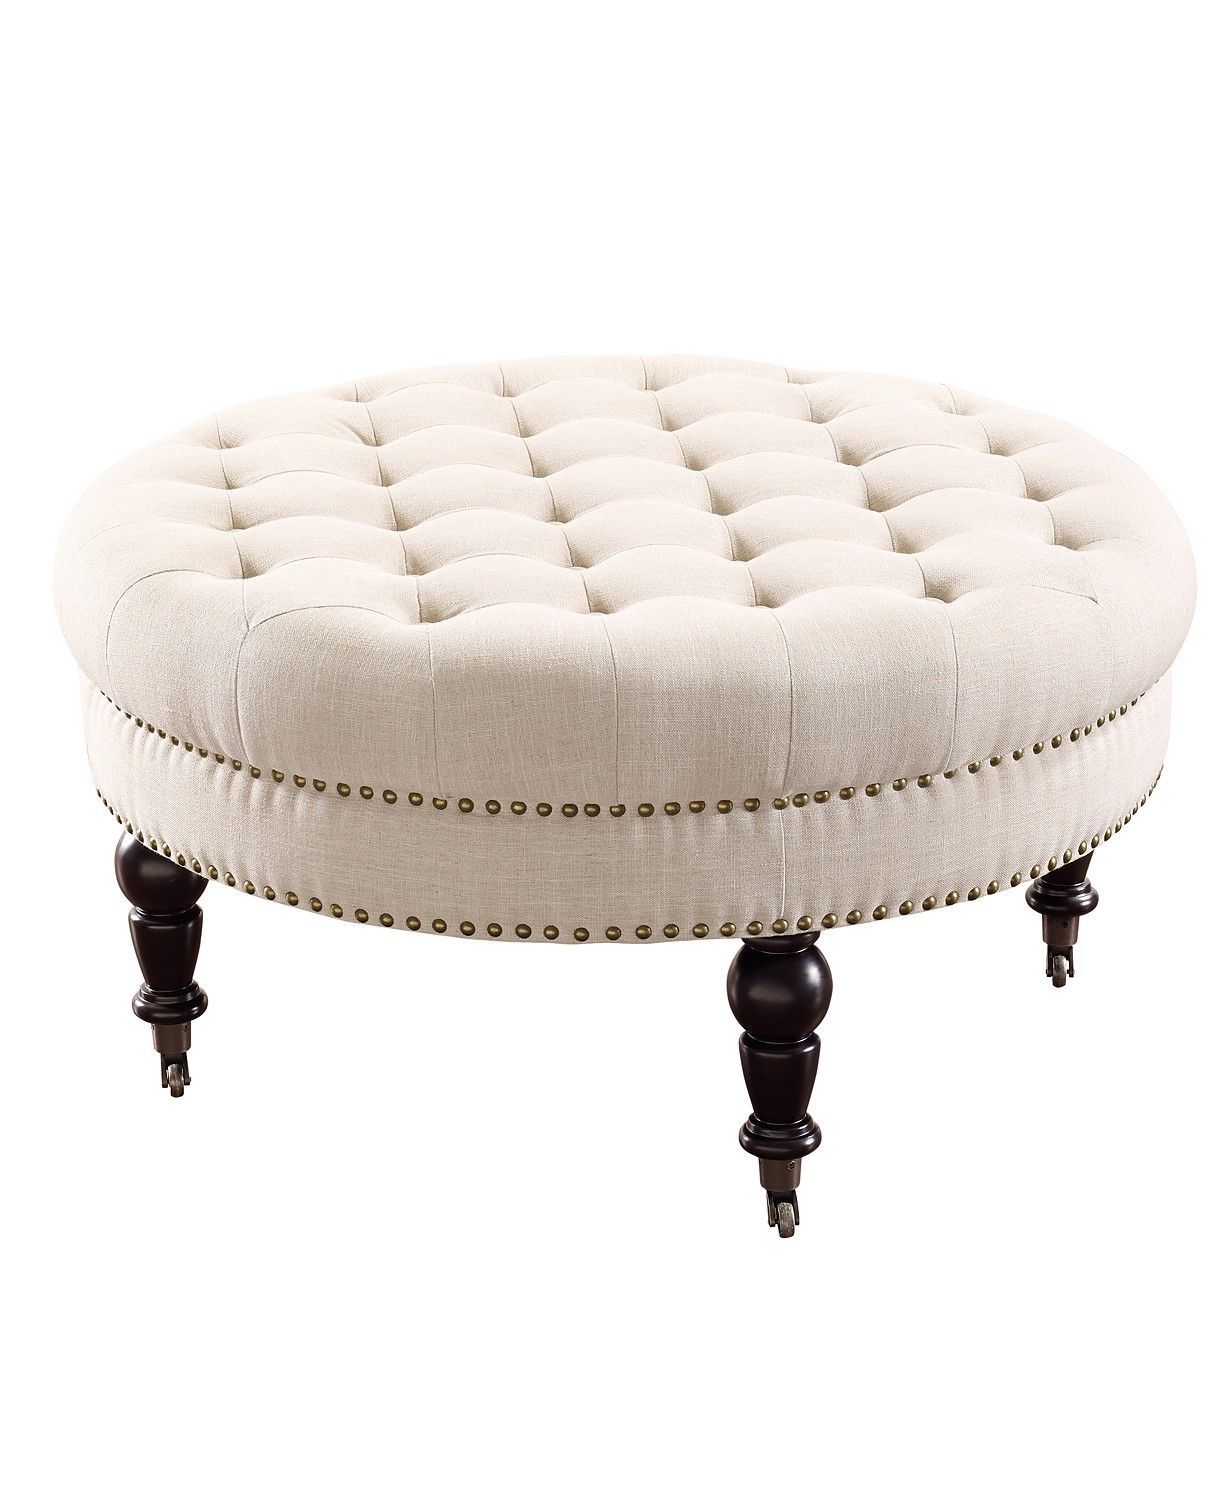 Linon Home Décor Isabelle Round Tufted Ottoman & Reviews – Furniture Within Caramel Leather And Bronze Steel Tufted Square Ottomans (View 3 of 20)